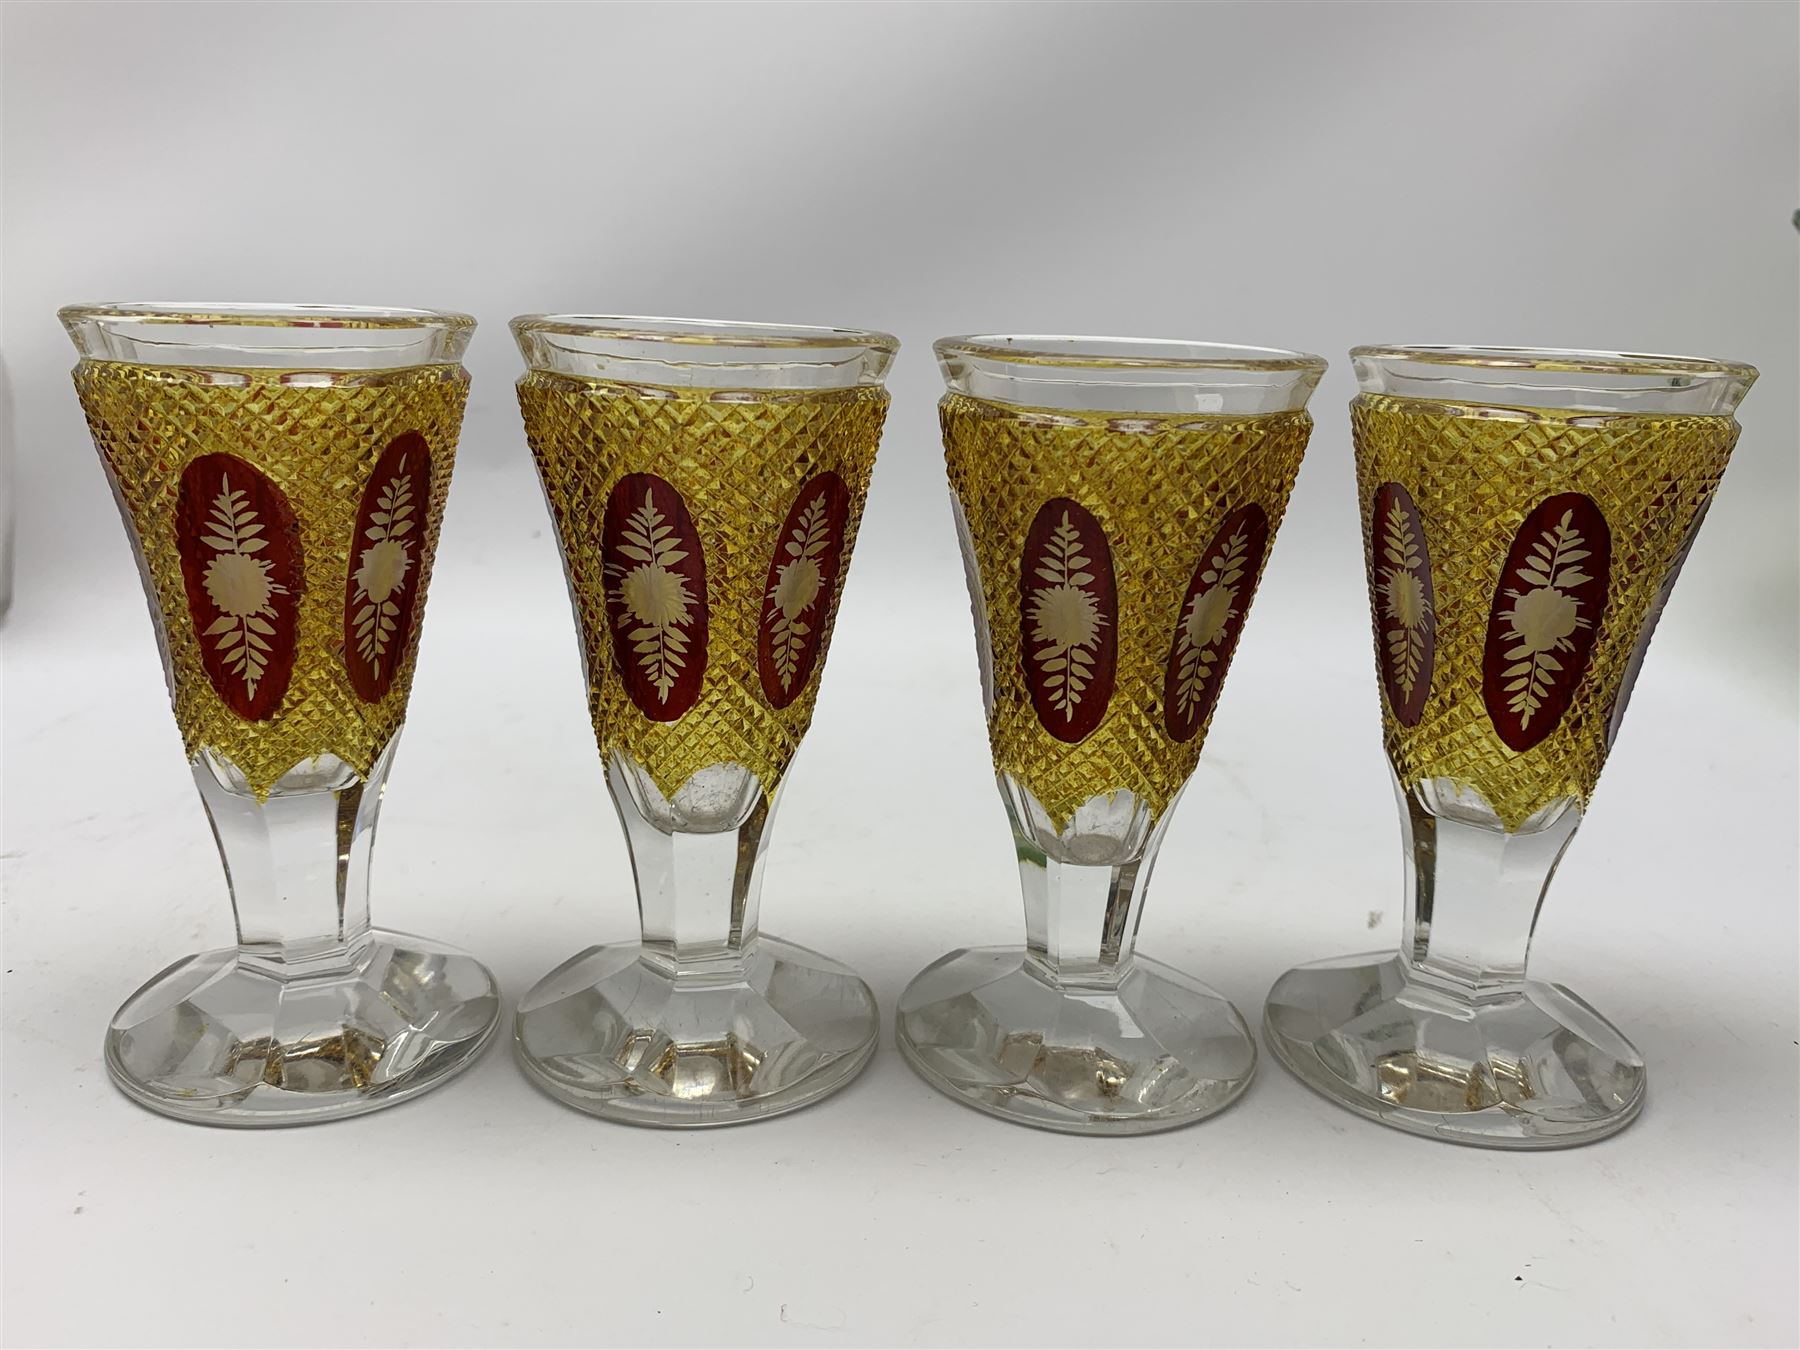 Set of four 19th century bohemian drinking glasses - Image 5 of 7